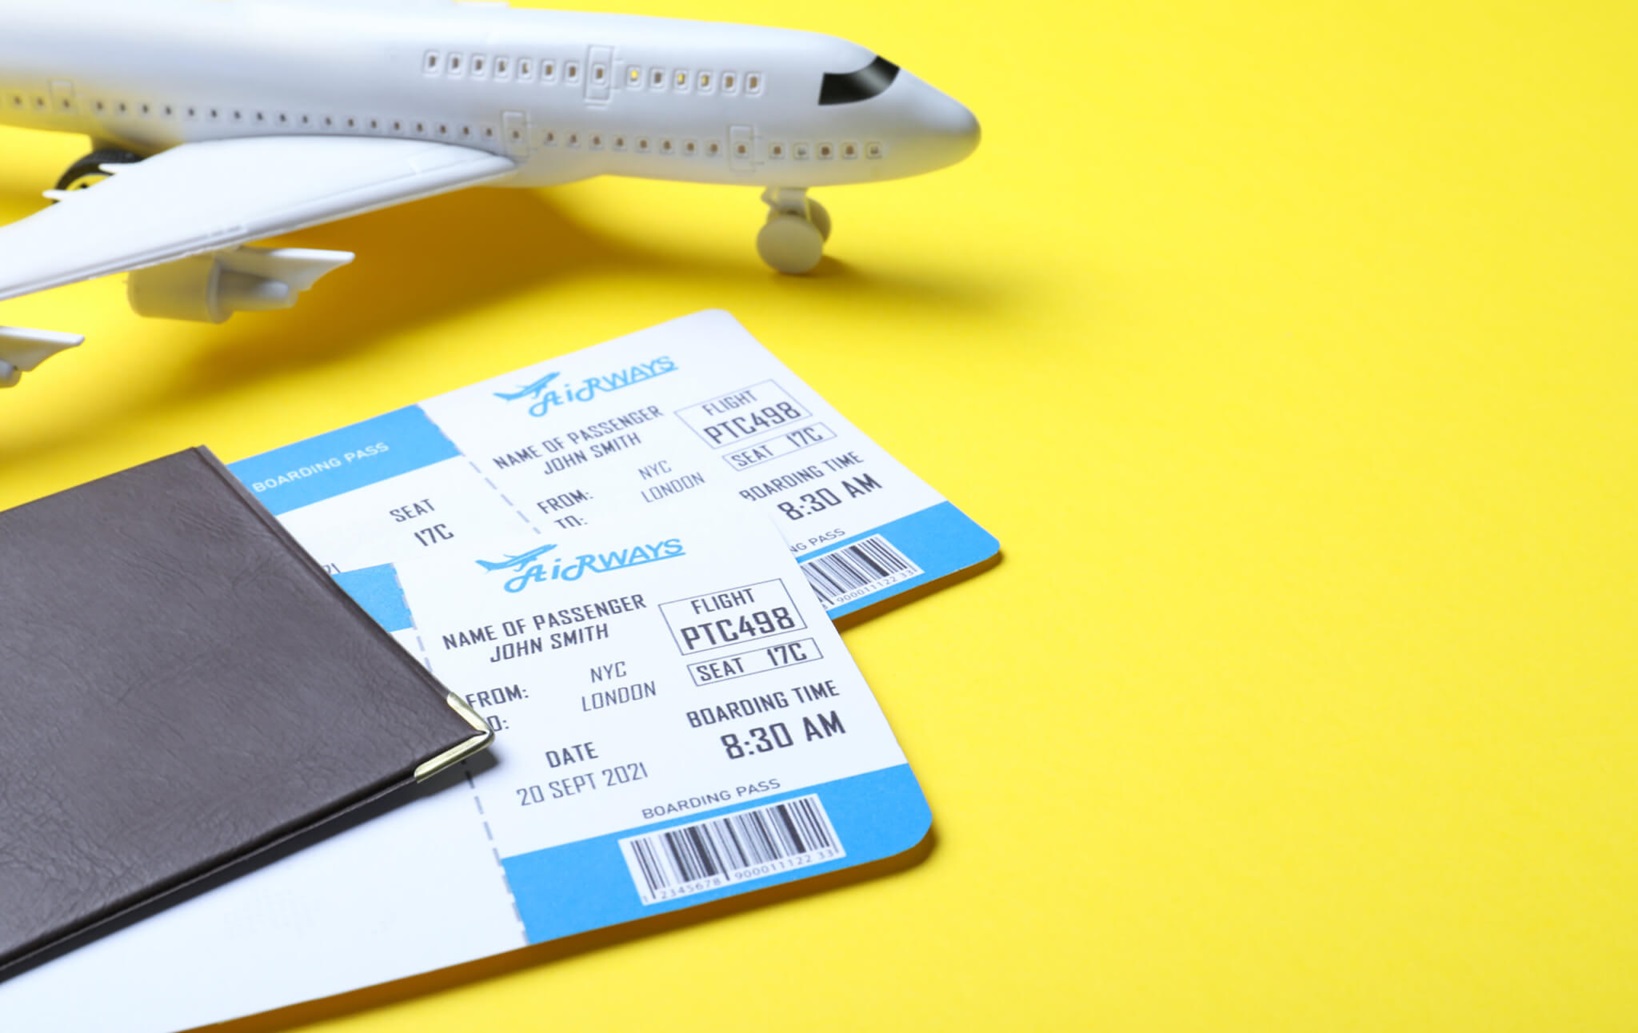 Planning Your Journey How to Prepare and Purchase Air Tickets Effectively